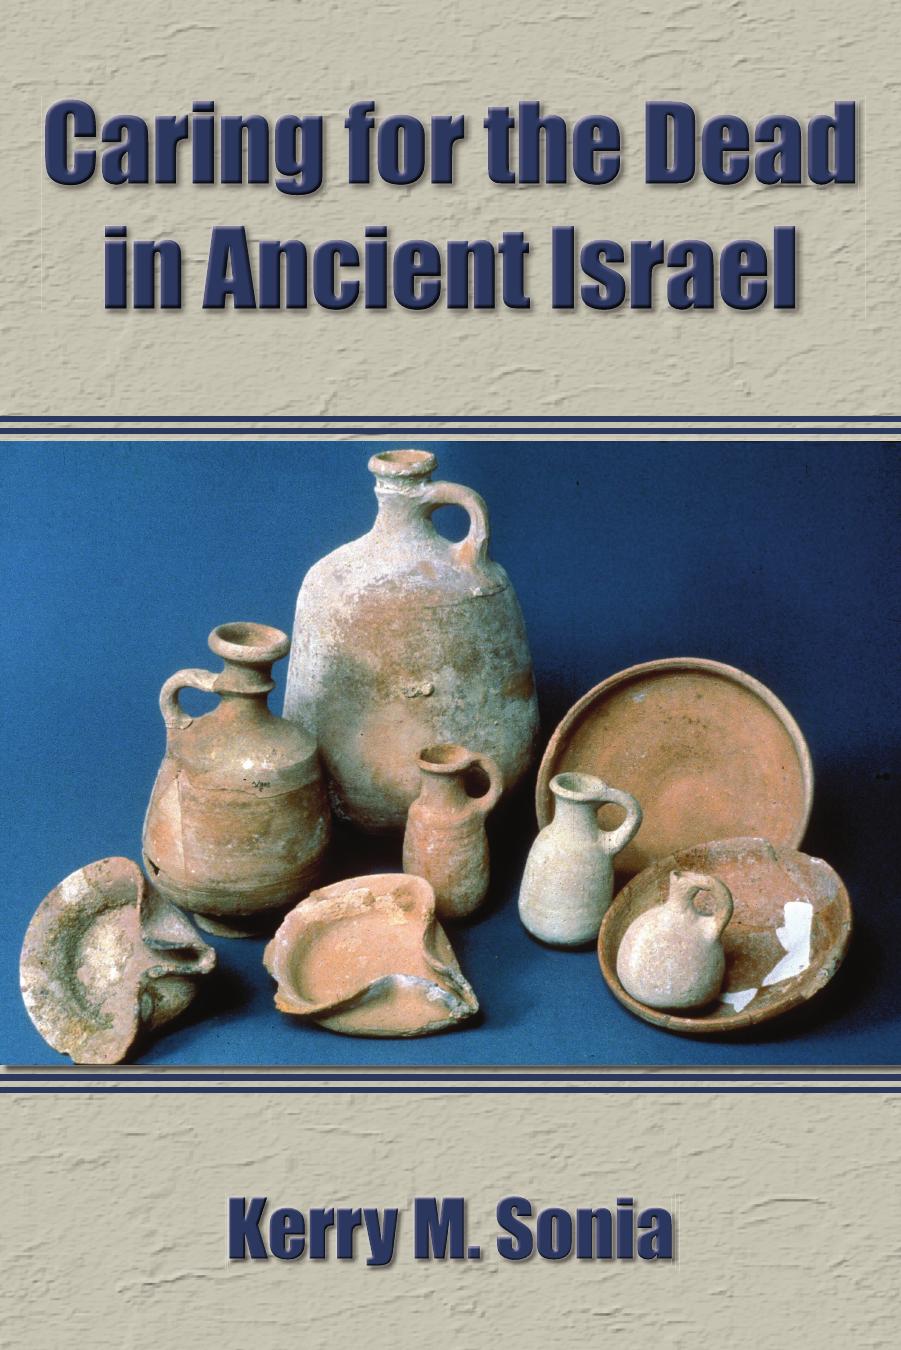 Caring for the Dead in Ancient Israel by Kerry M. Sonia